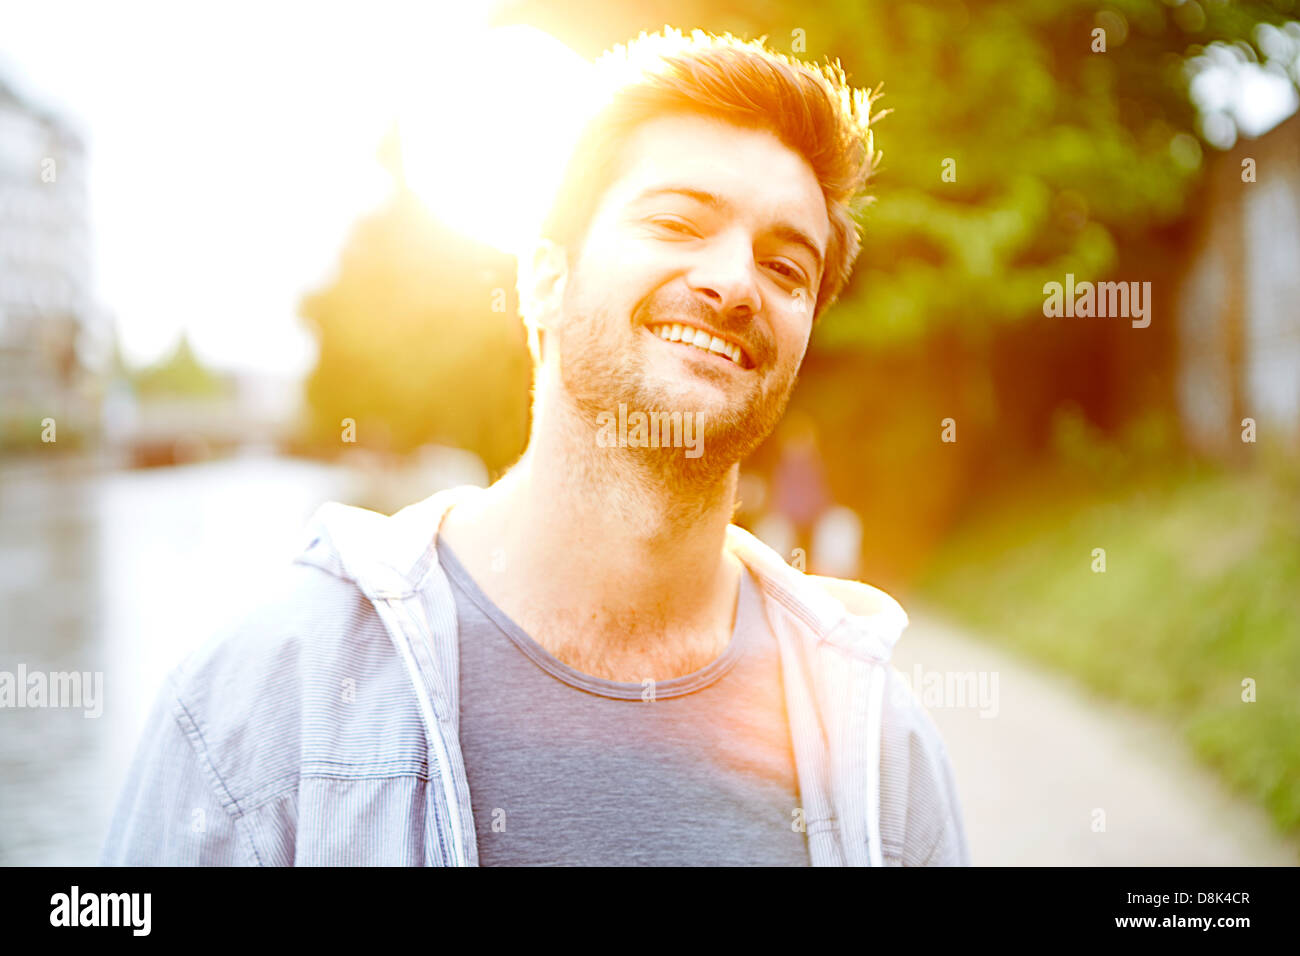 laughing young man with by canal sunlight lens flare Stock Photo